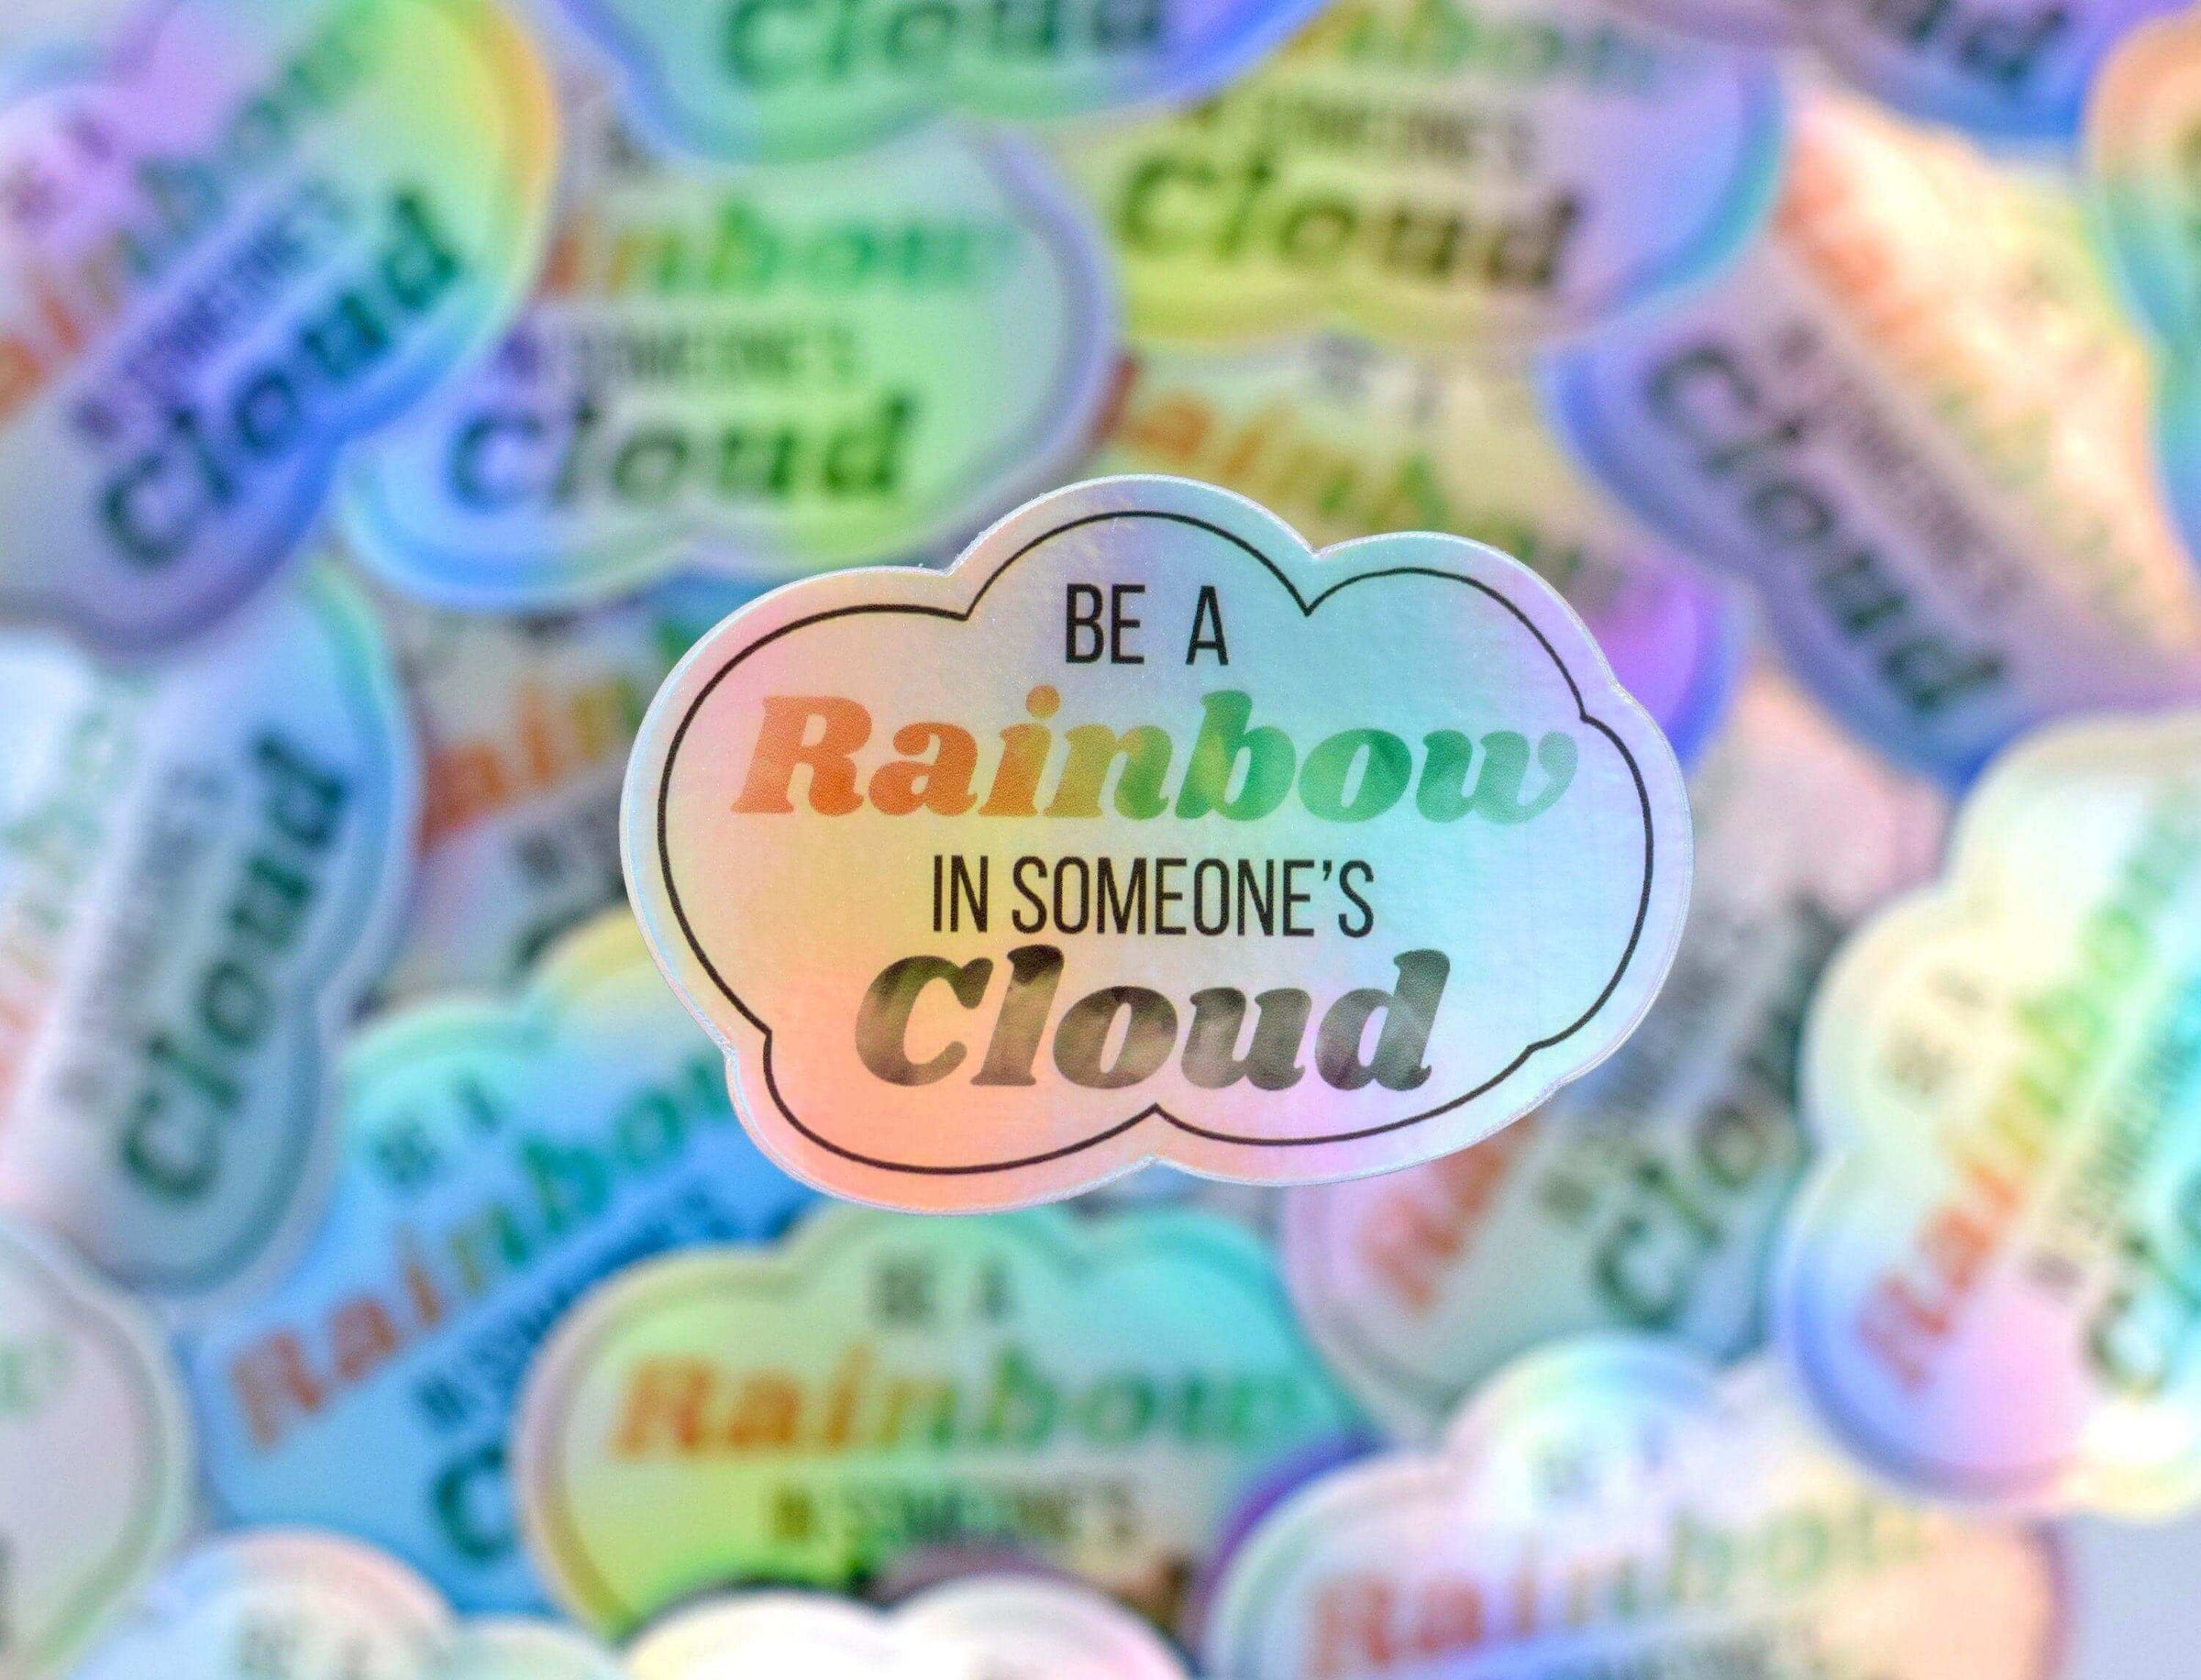 Rainbow Sticker, Quote Stickers, Holographic Sticker, Water Bottle Stickers, Positive Stickers, Happy Stickers, Aesthetic Stickers - Winks Design Studio,LLC